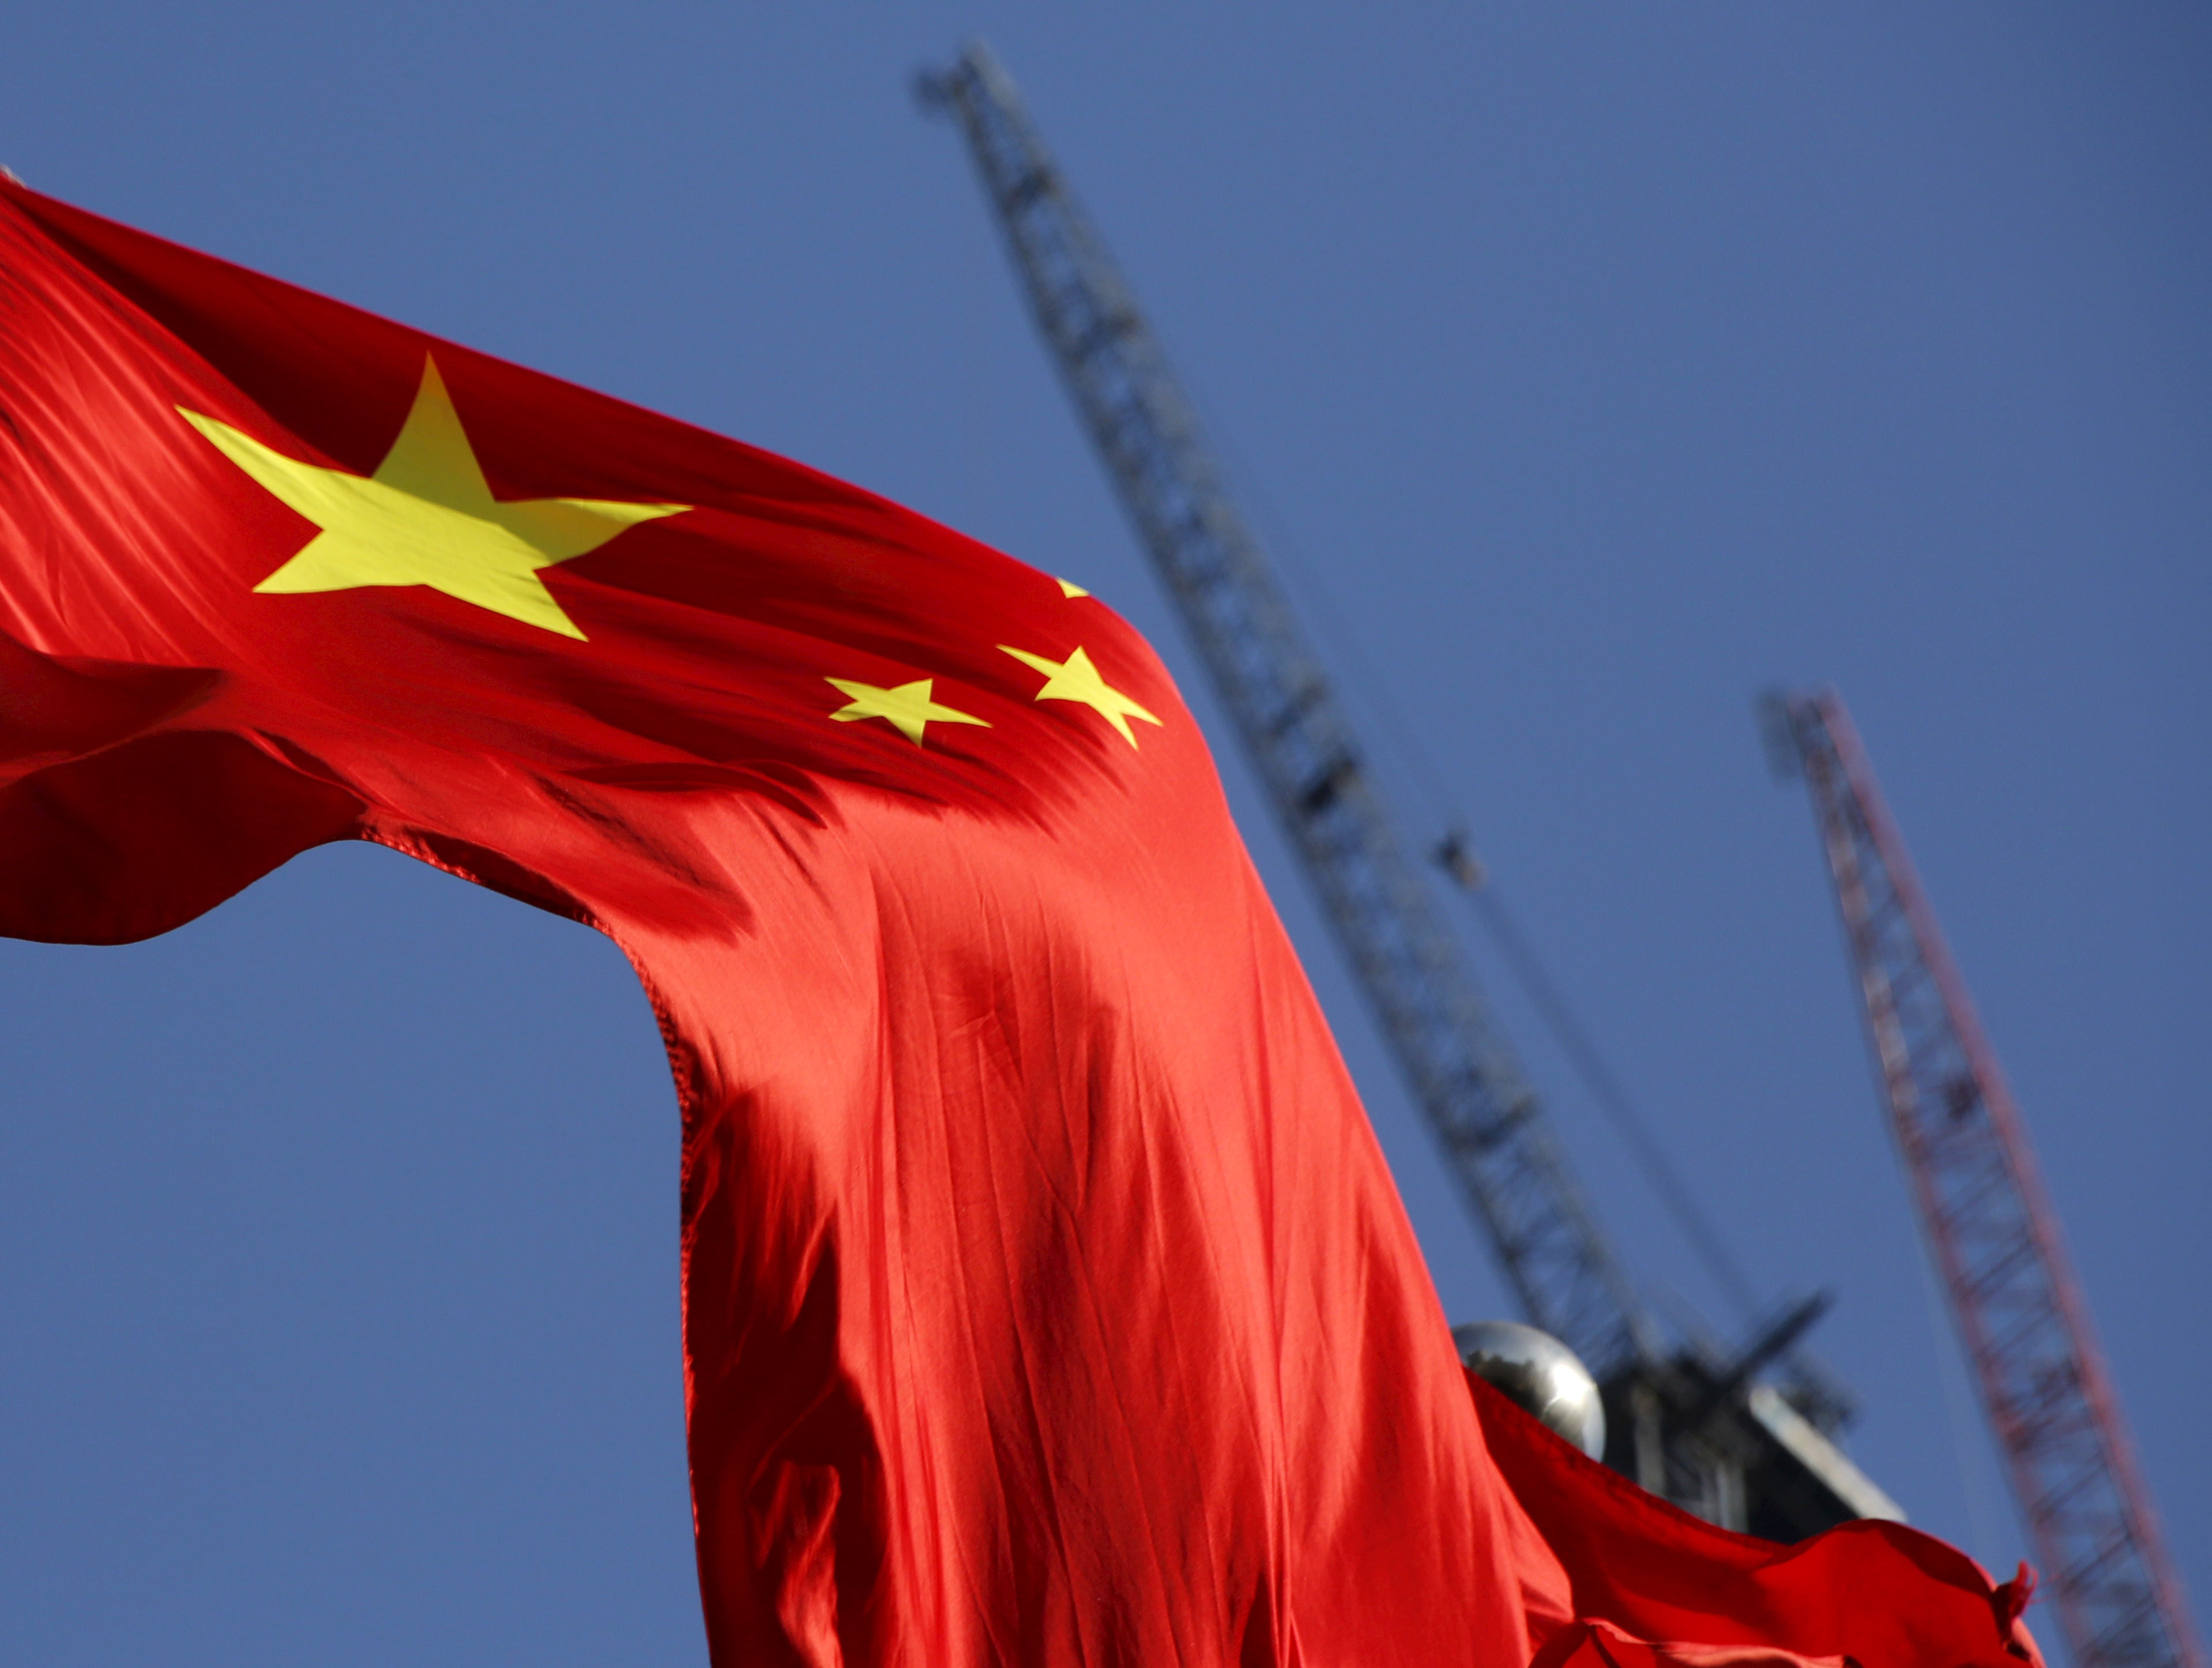 china-s-expansion-is-the-biggest-security-threat-to-the-u-s-intelligence-report-says